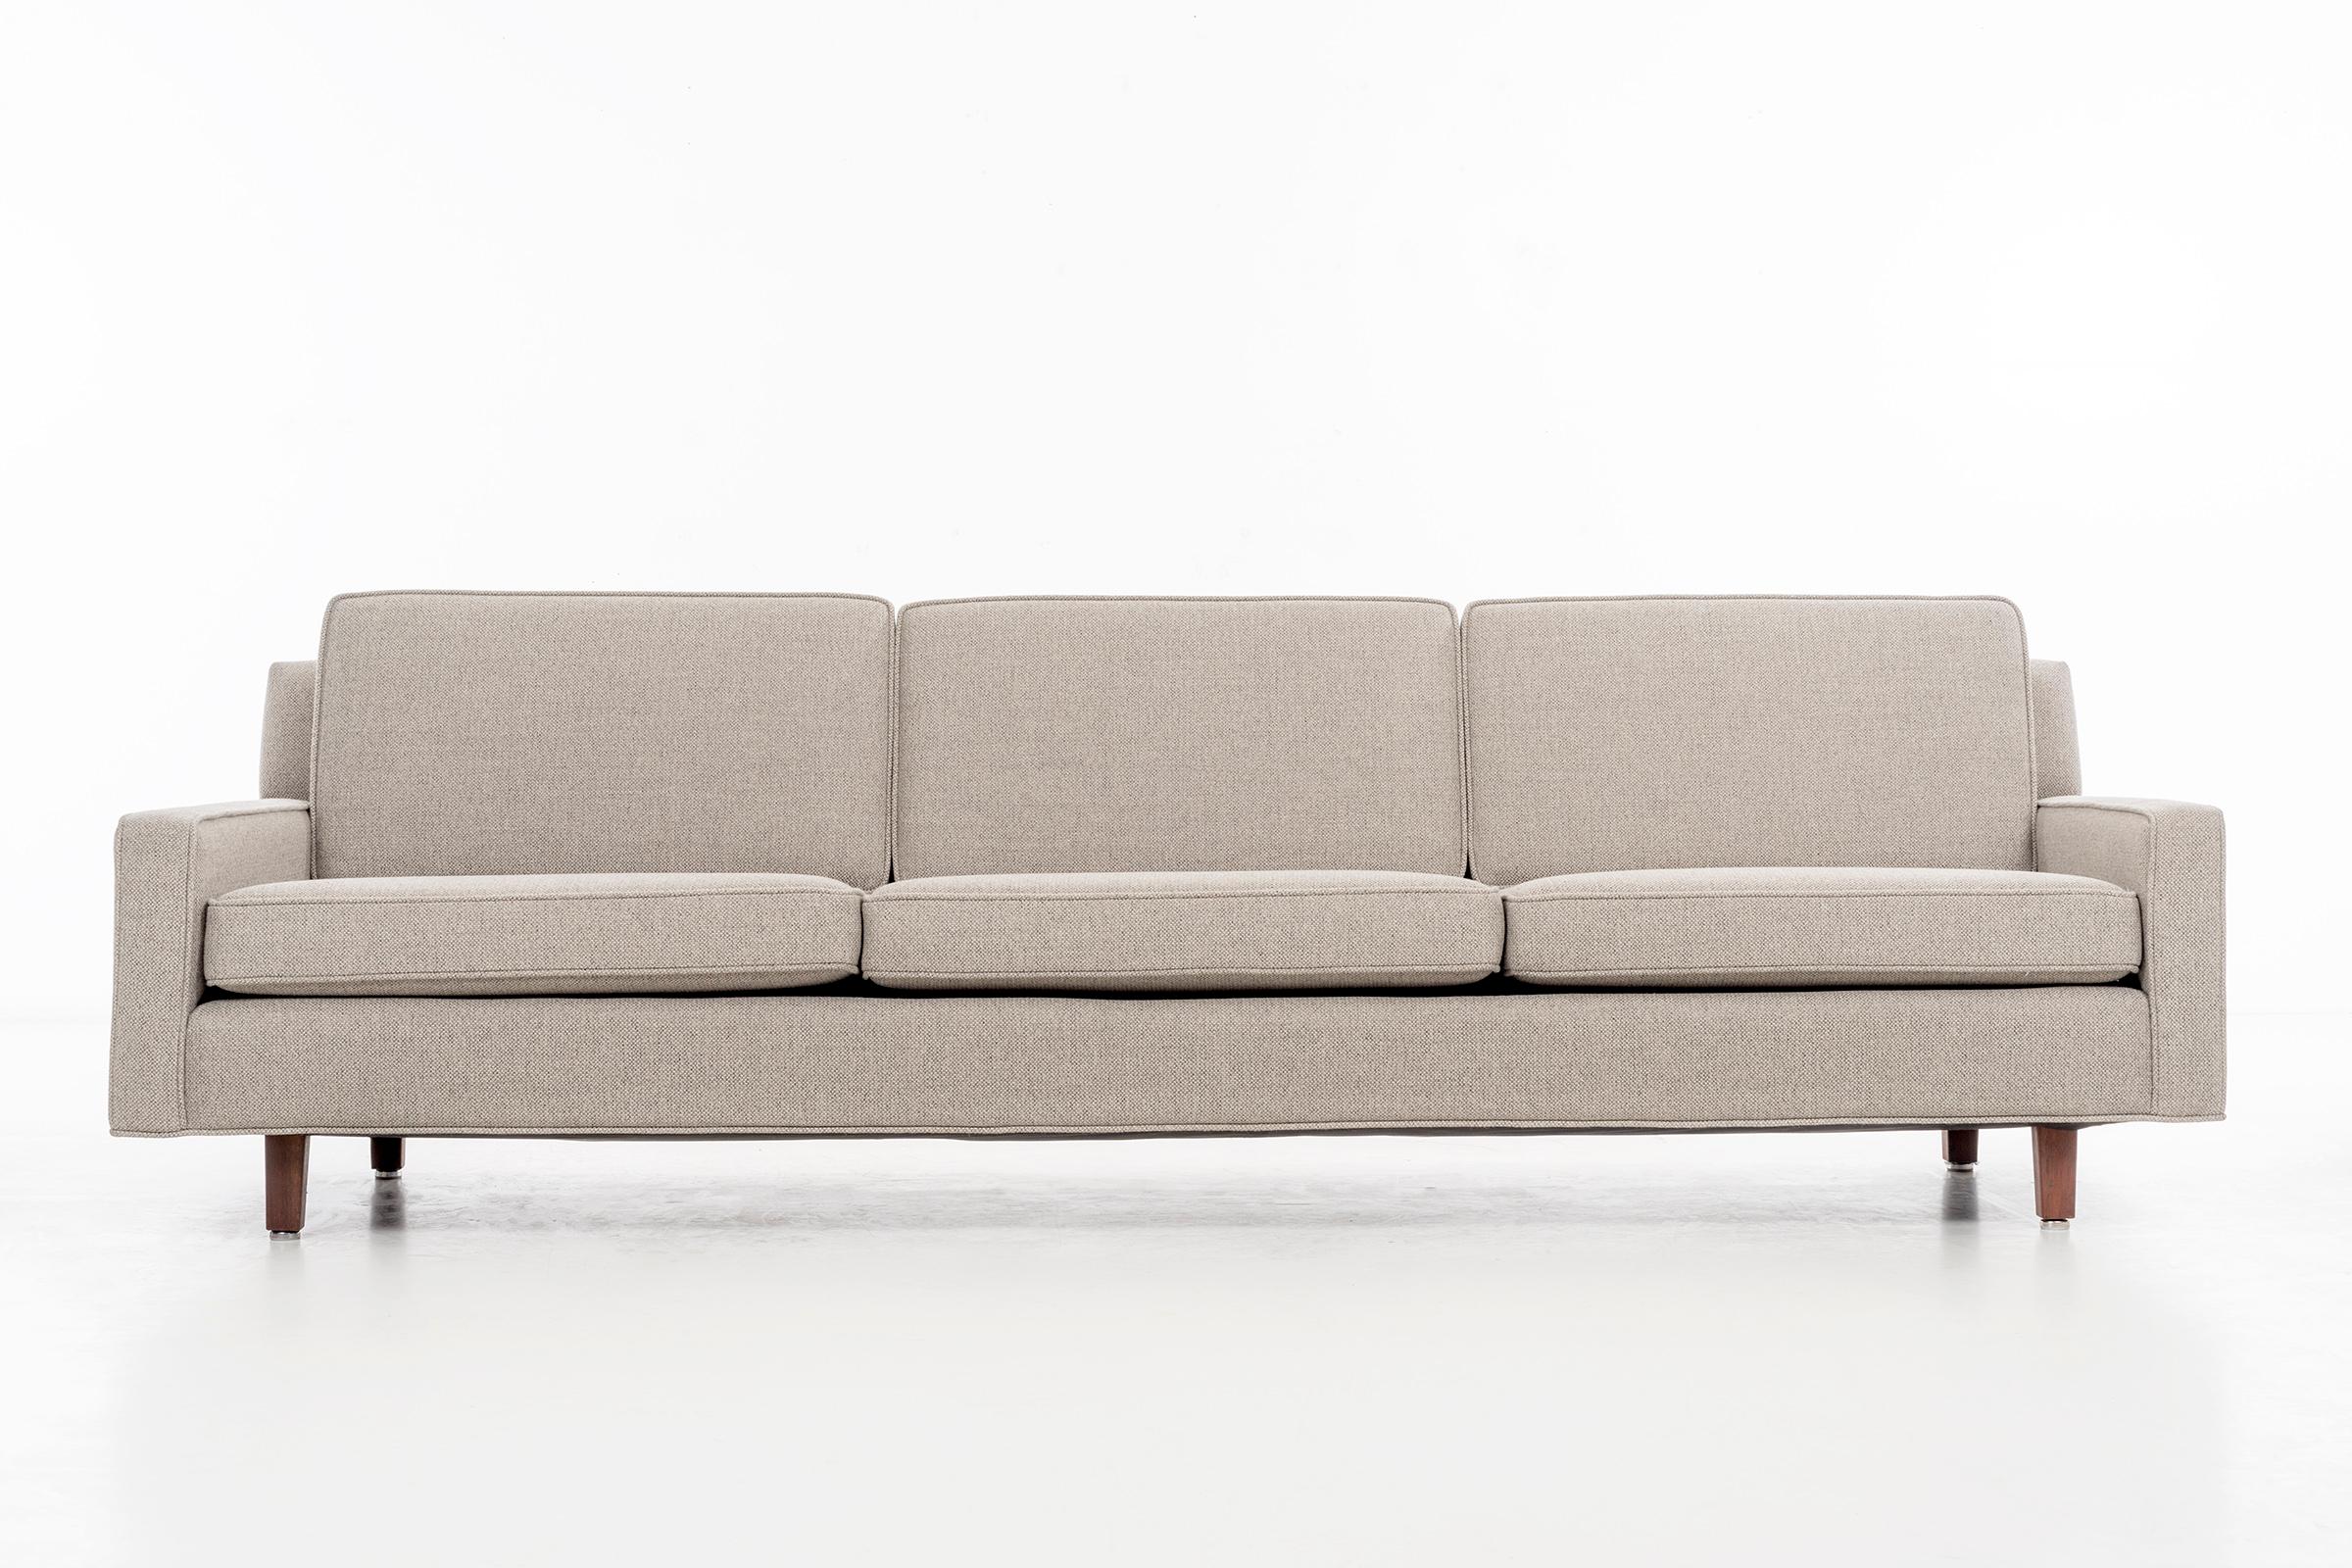 Florence Knoll three seat sofa model 96-1.
Solid oiled walnut legs recovered with great plains woven wool fabric.
 